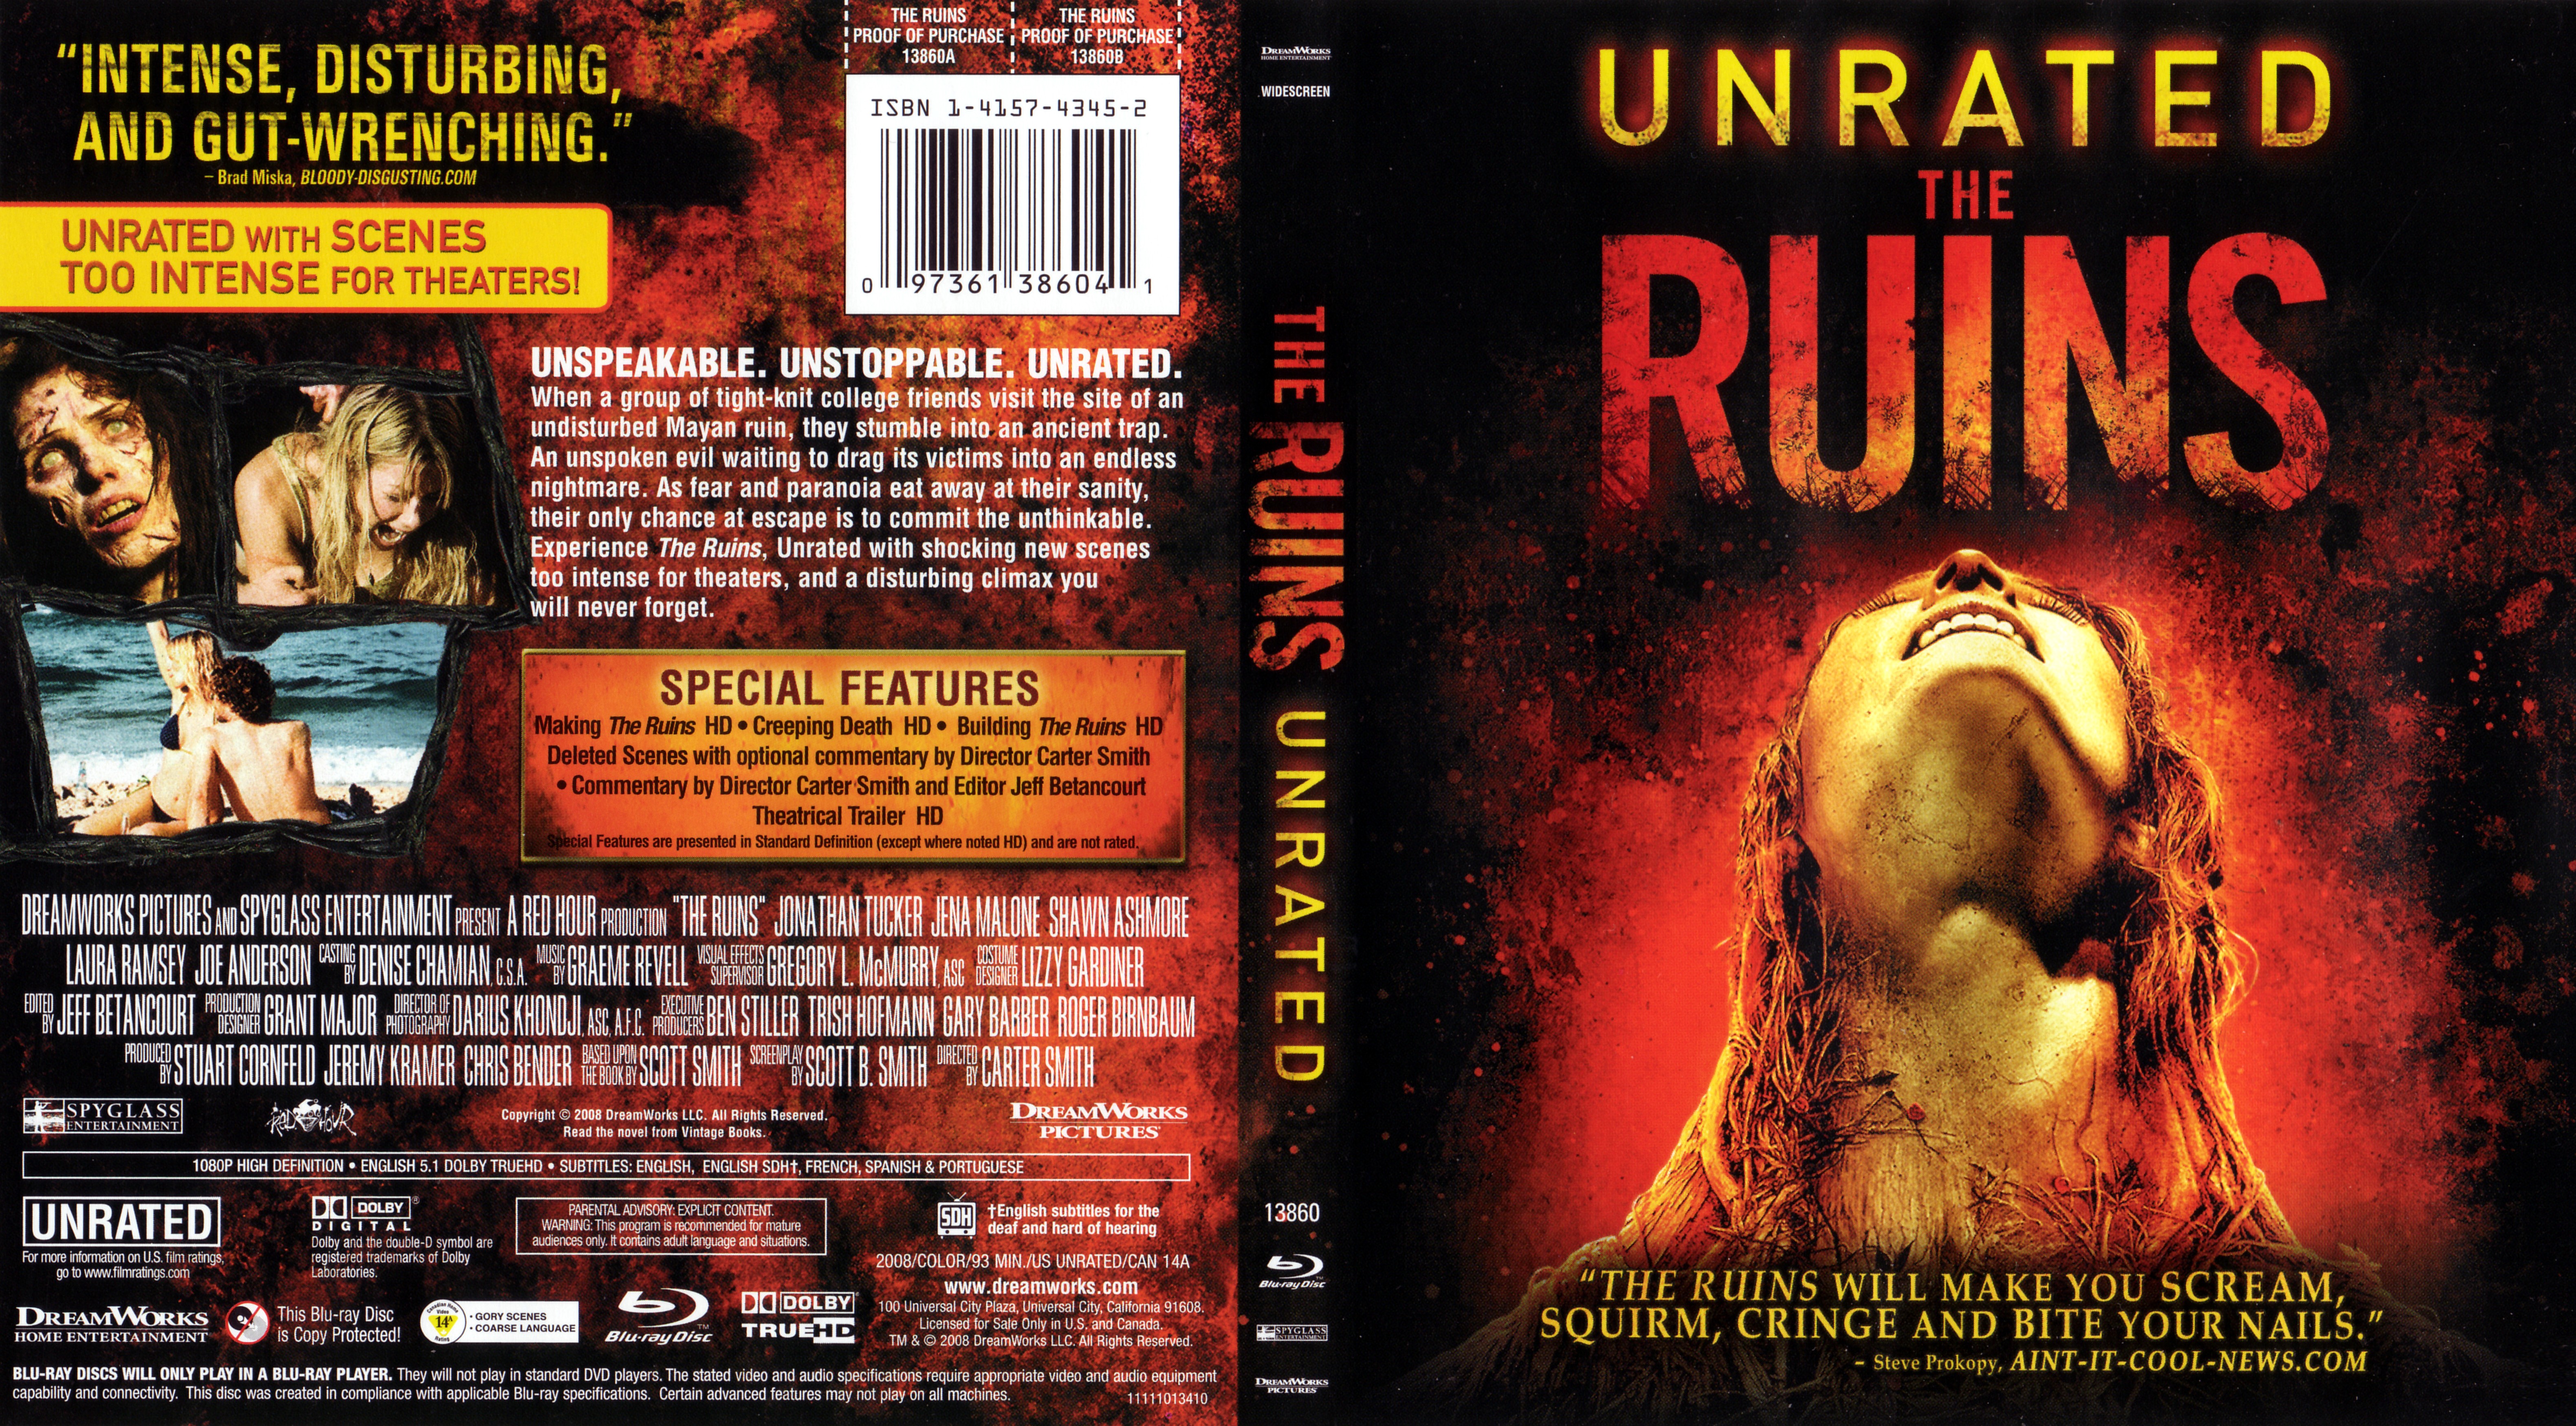 Jaquette DVD The ruins - Les ruines (Canadienne) (BLU-RAY)